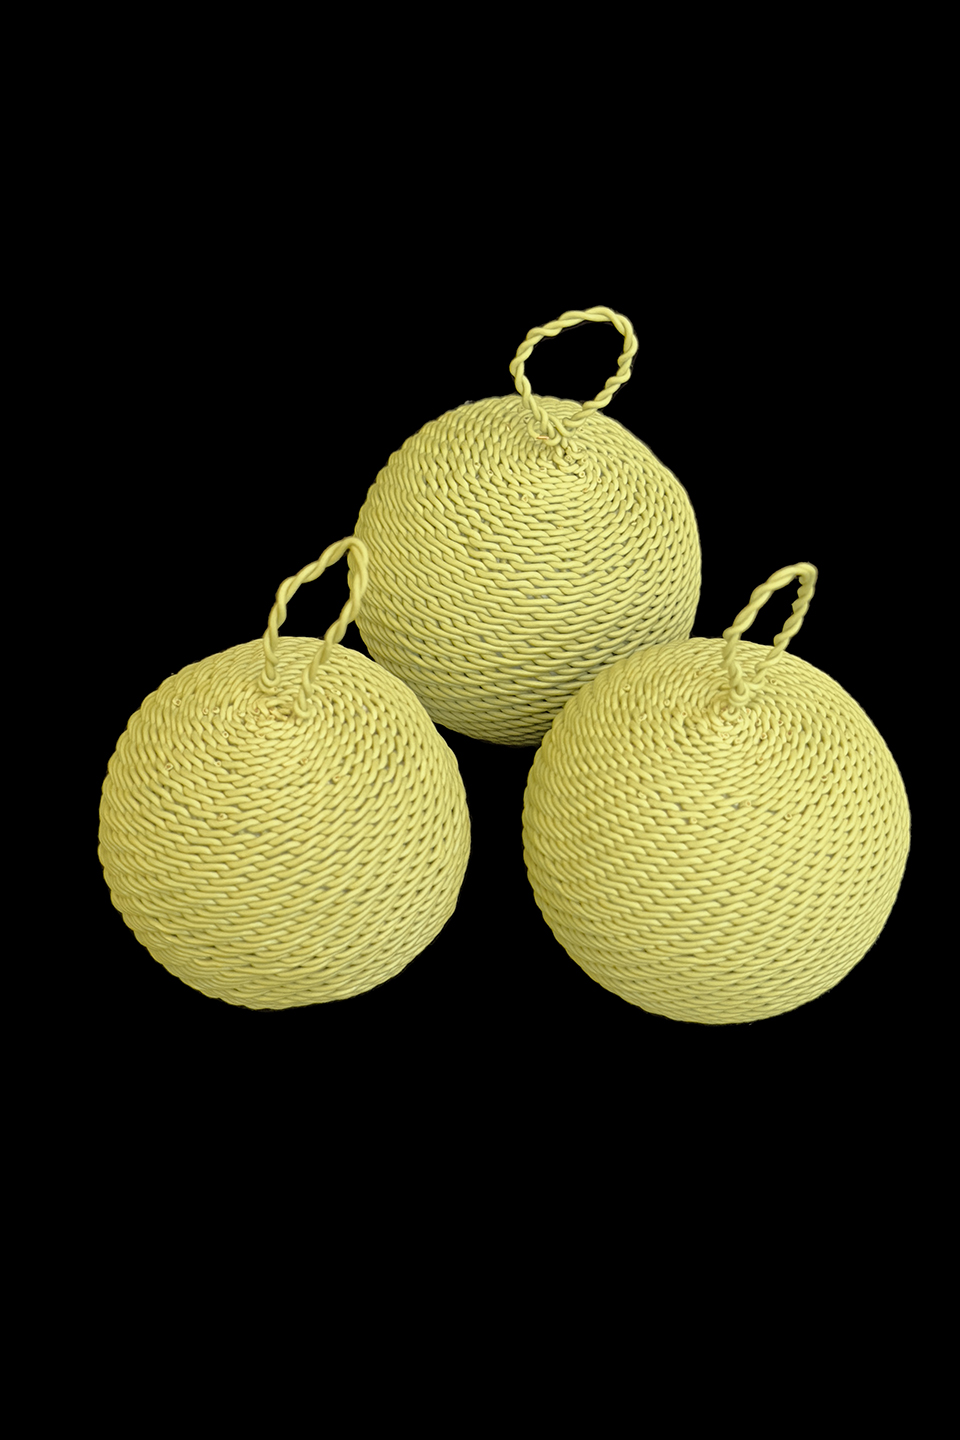 Set of 3 Chartreuse Telephone Cable Wire Ball Ornaments - South Africa (1 set left)